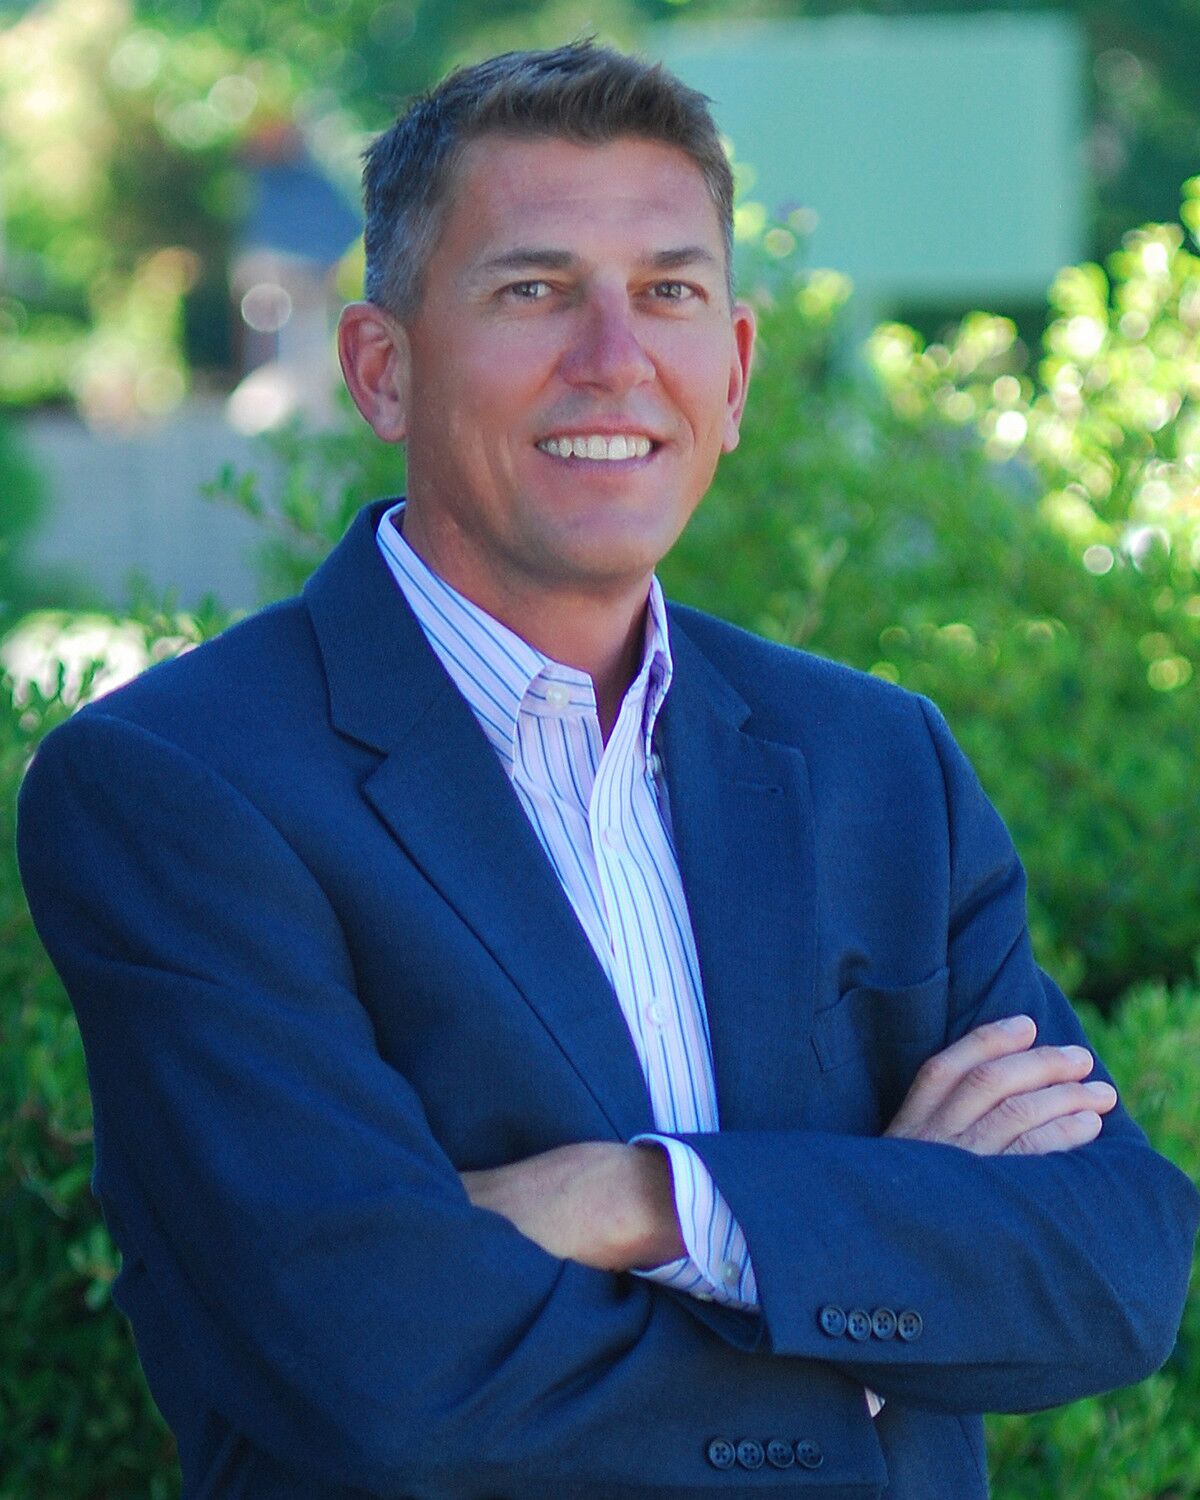 Superintendent Robert Haley resigned from the San Dieguito Union High School District.